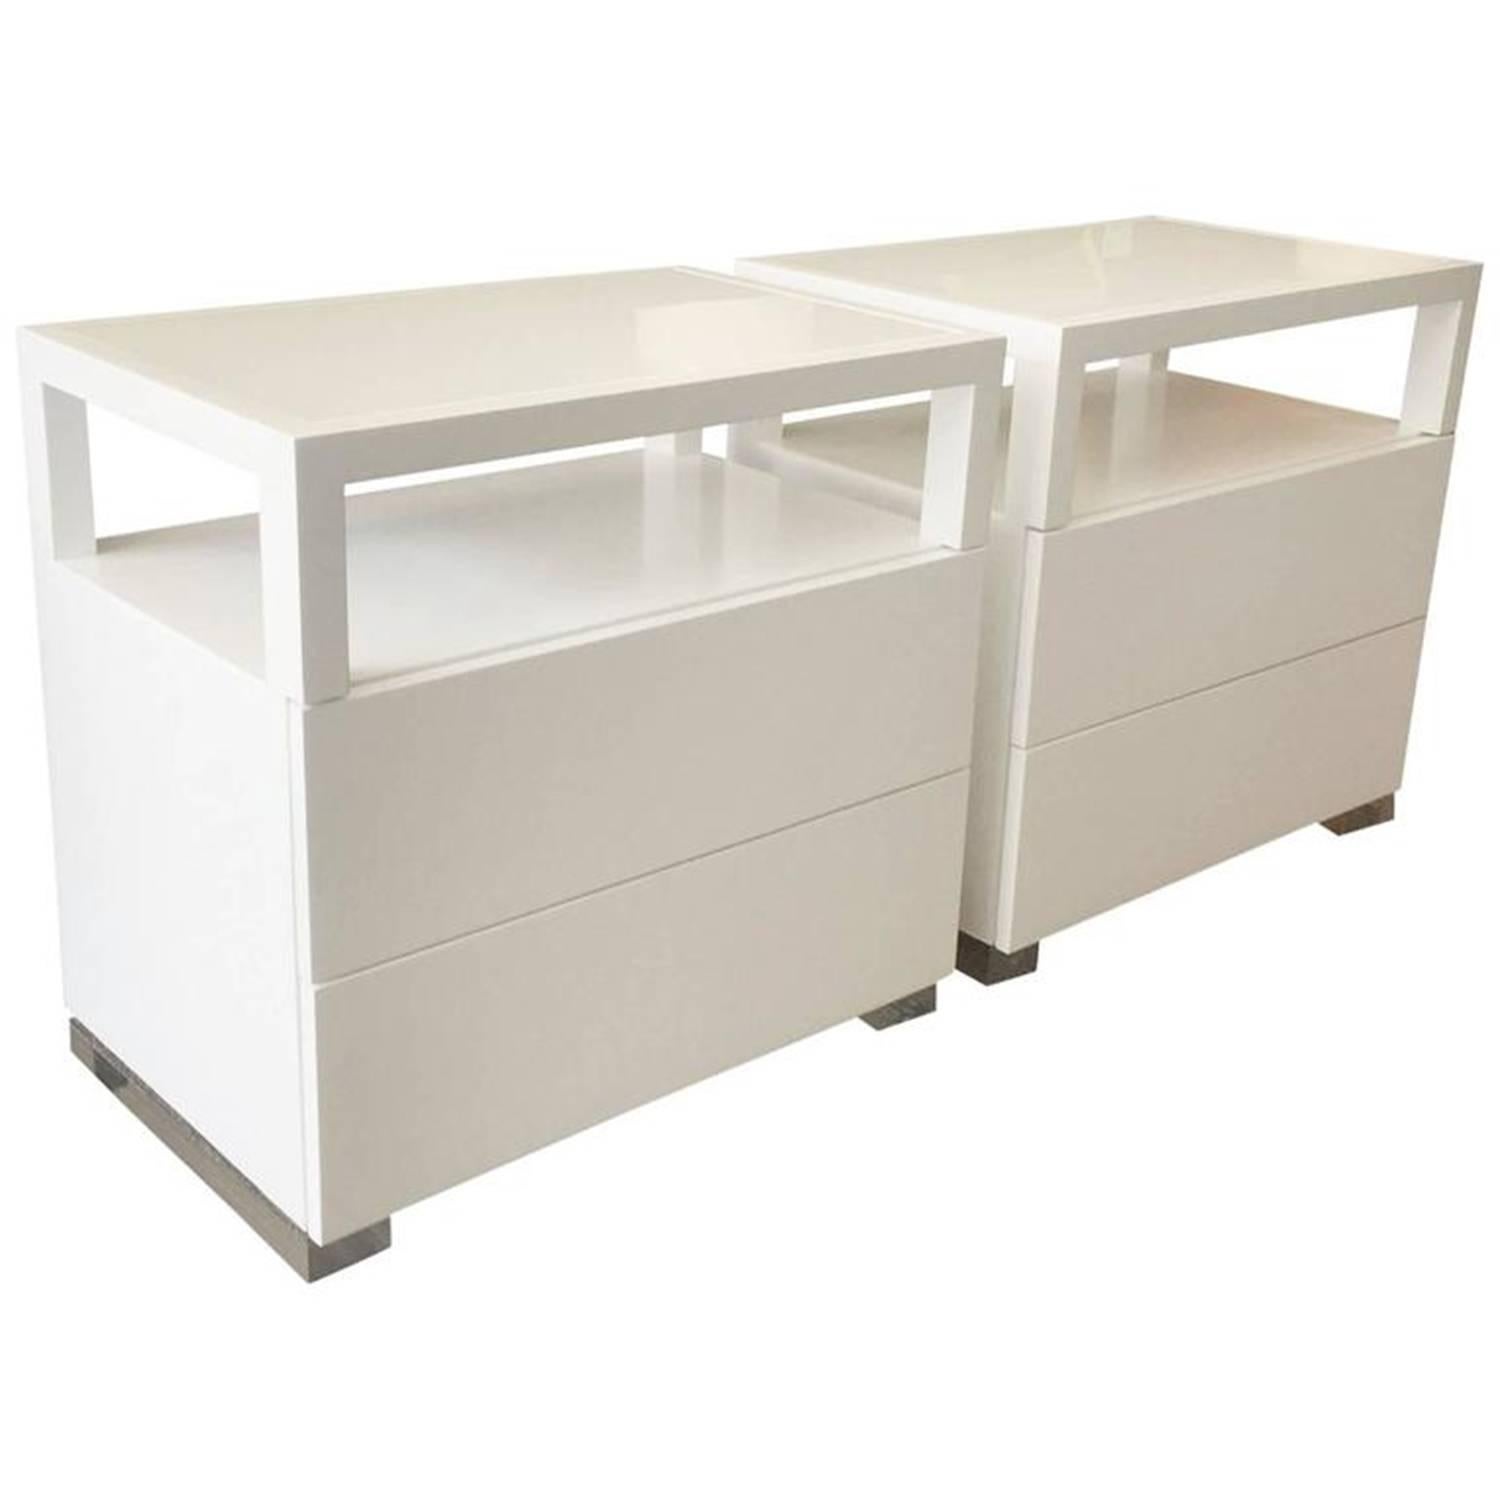 Pair of White Lacquer and Lucite Nightstands by Cain Modern